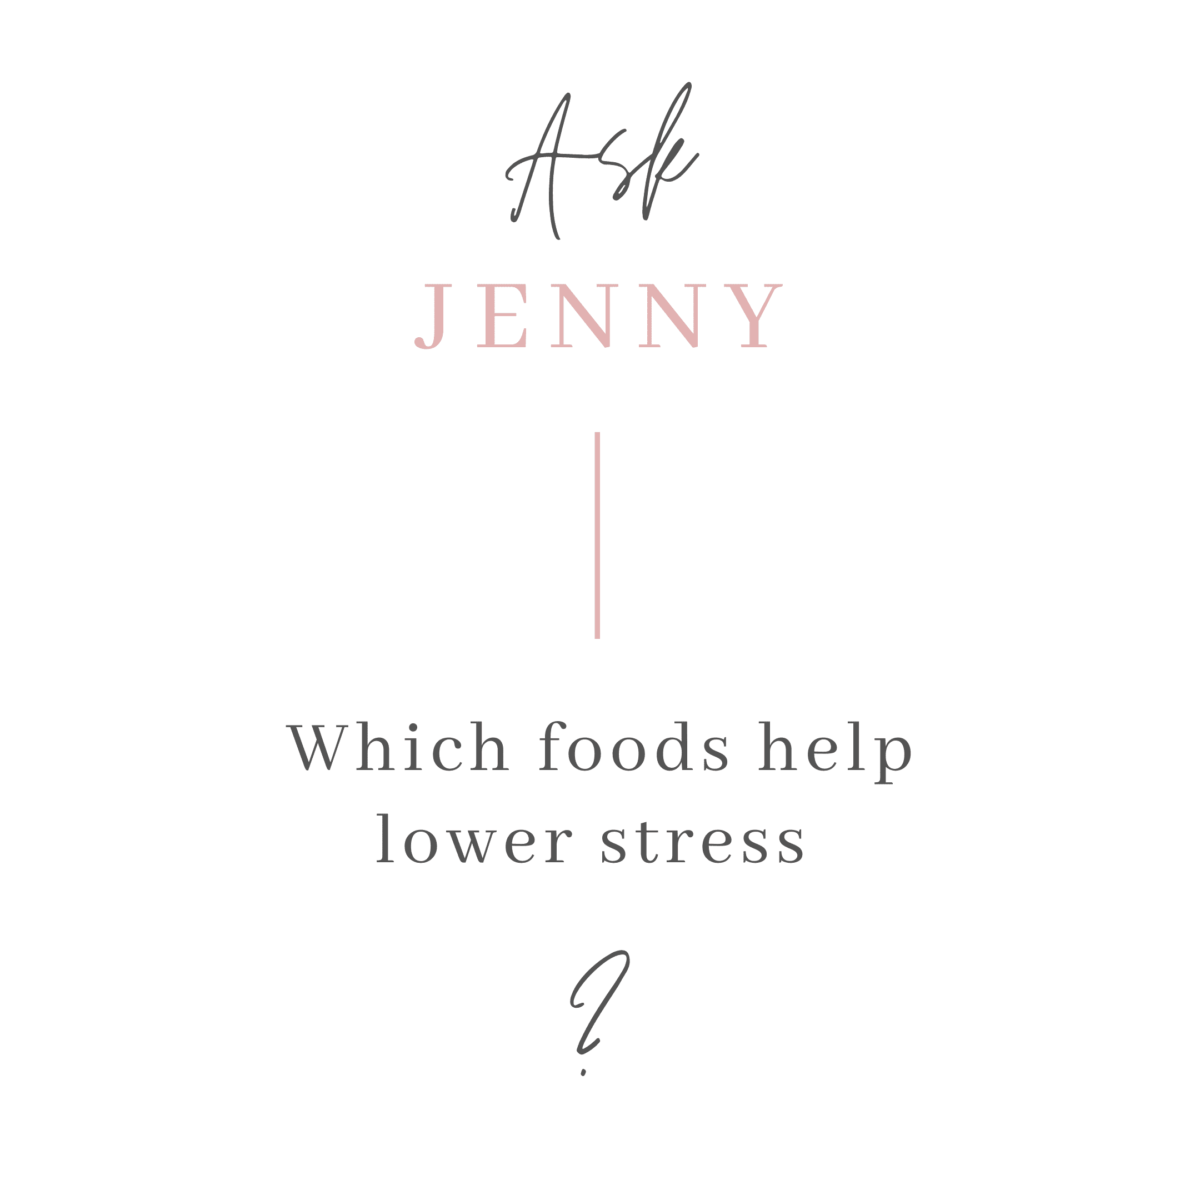 Ask Jenny Foods for Stress